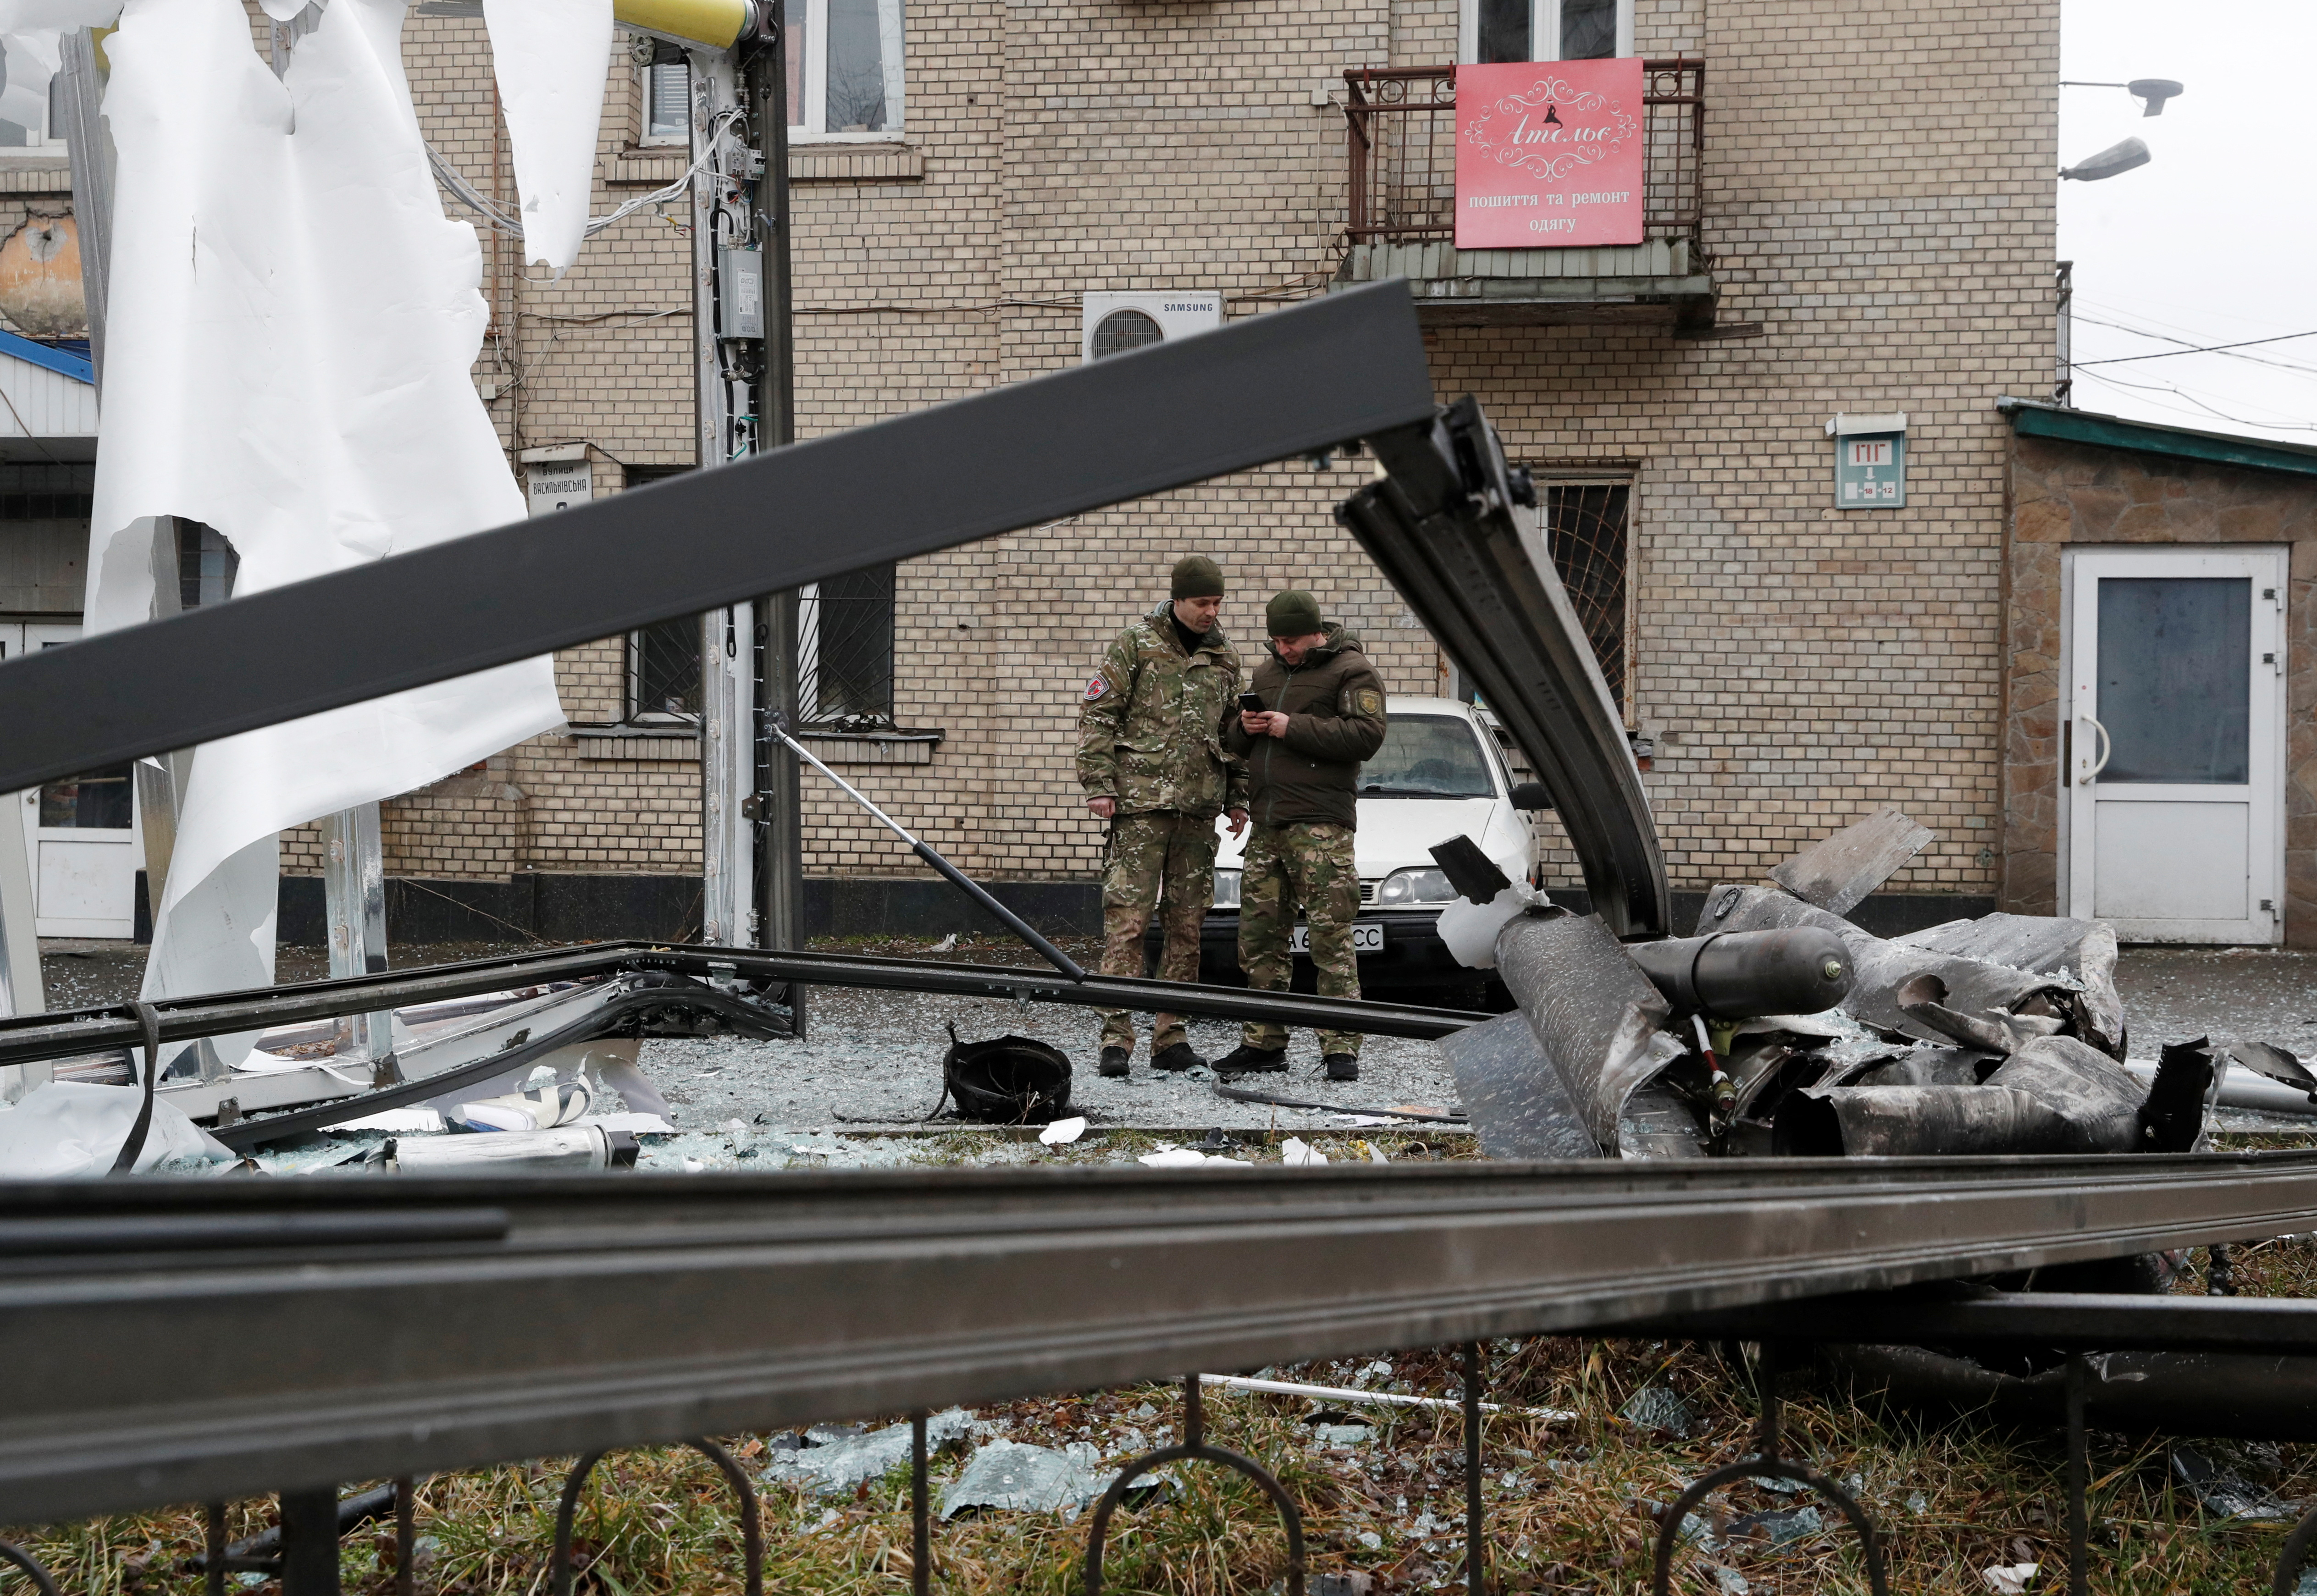 Police officers inspect the remains of a missile that fell in the street in Kyiv